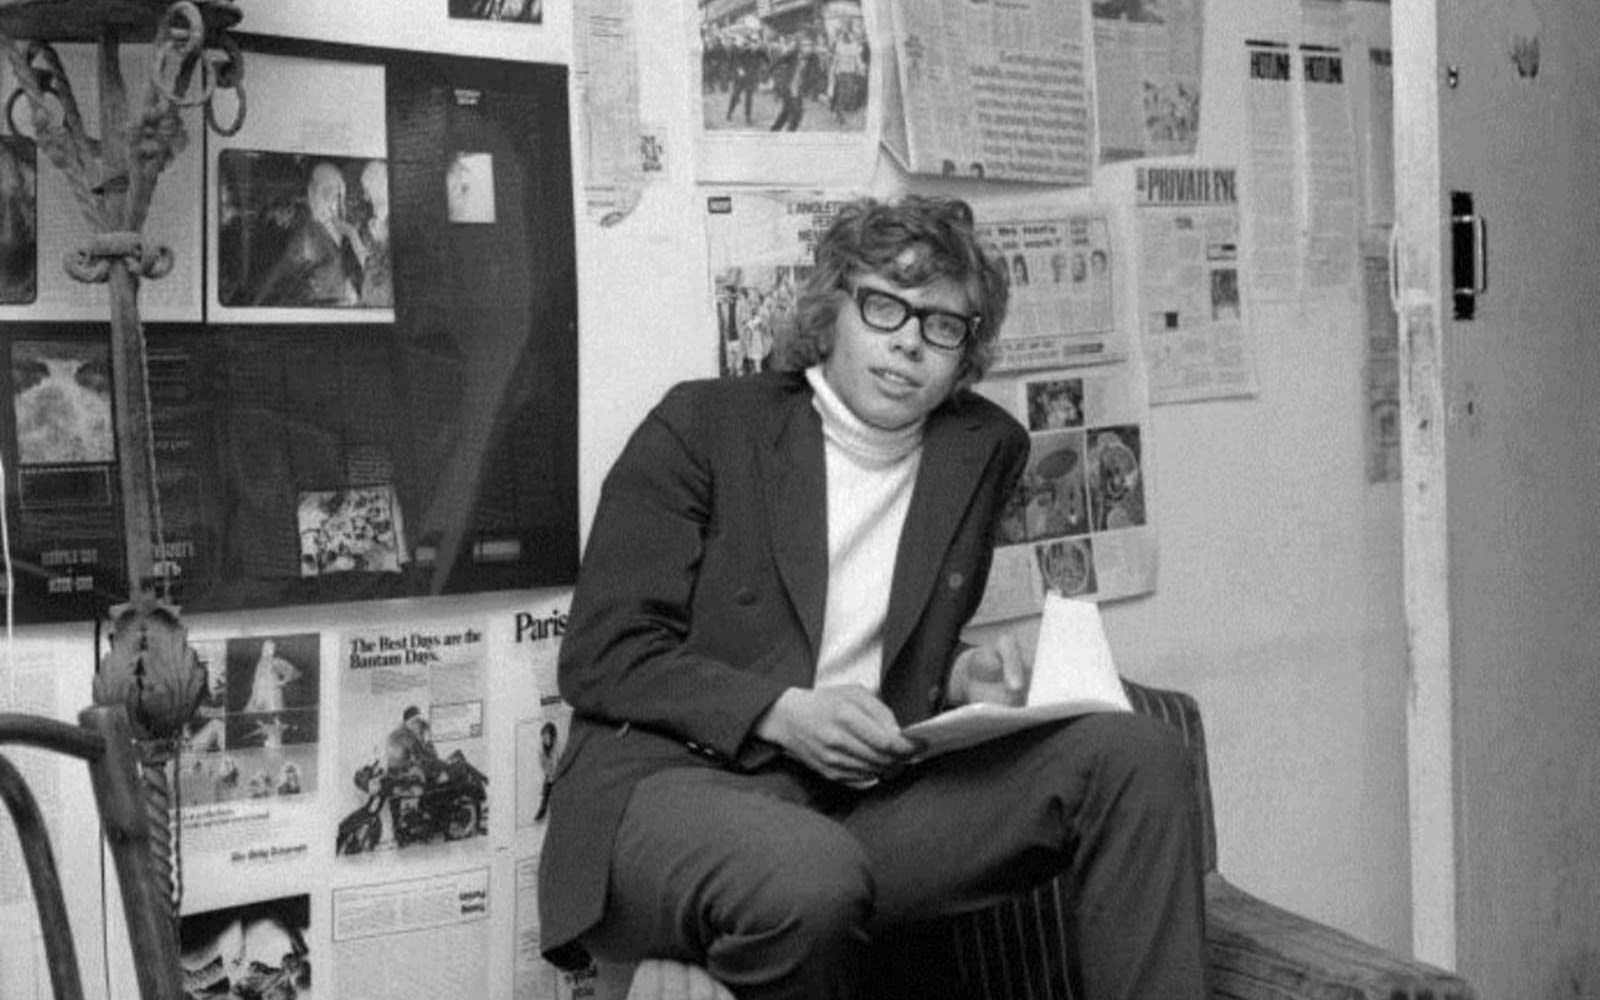 a young Richard Branson poses in front of newspaper clippings for Student Magazine